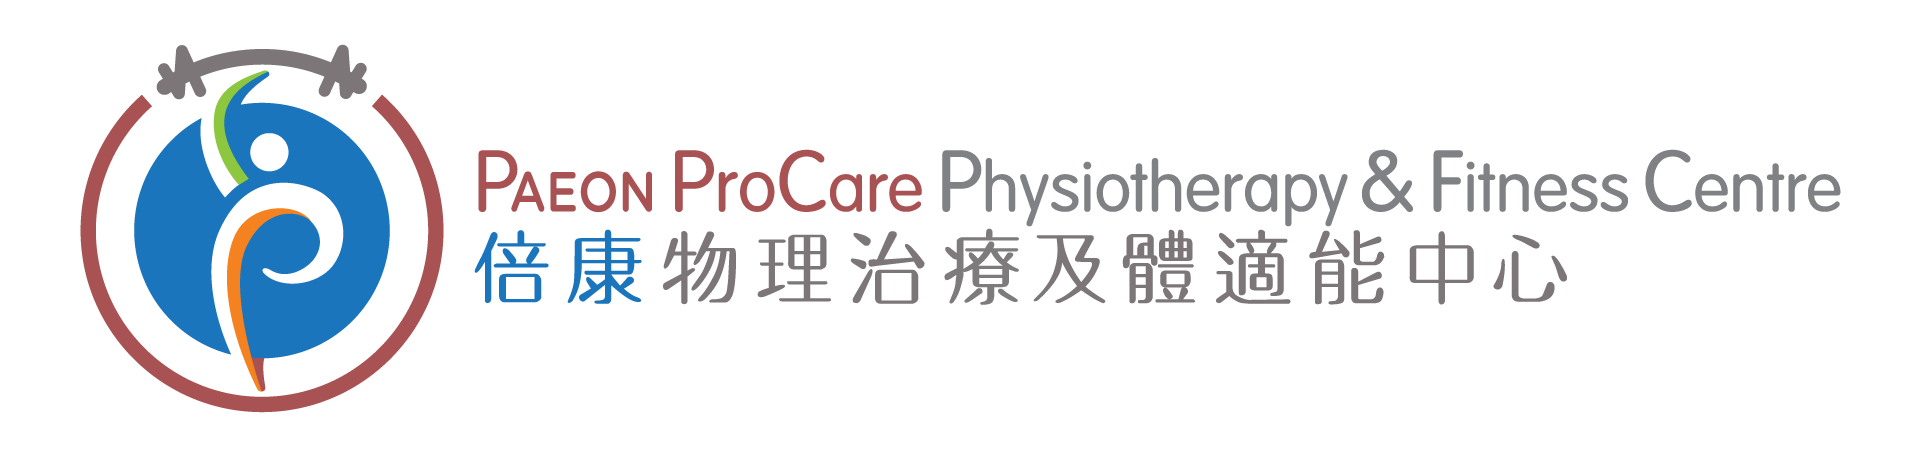 Paeon ProCare Physiotherapy & Fitness